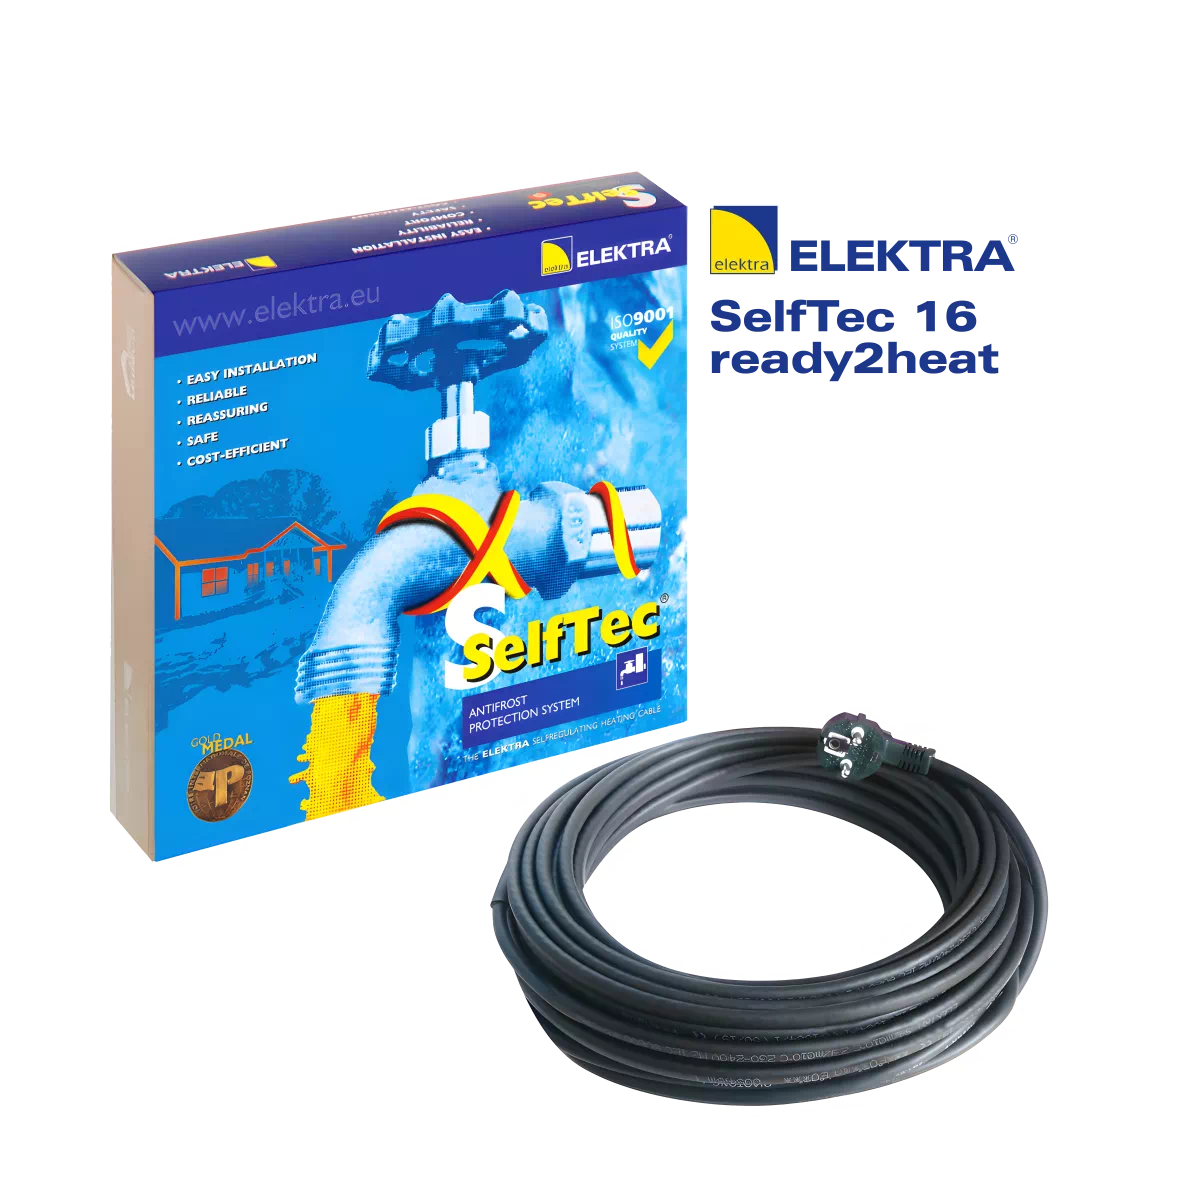 ELEKTRA-SelfTec-16-ready2heat-Electric-Heating-Cable